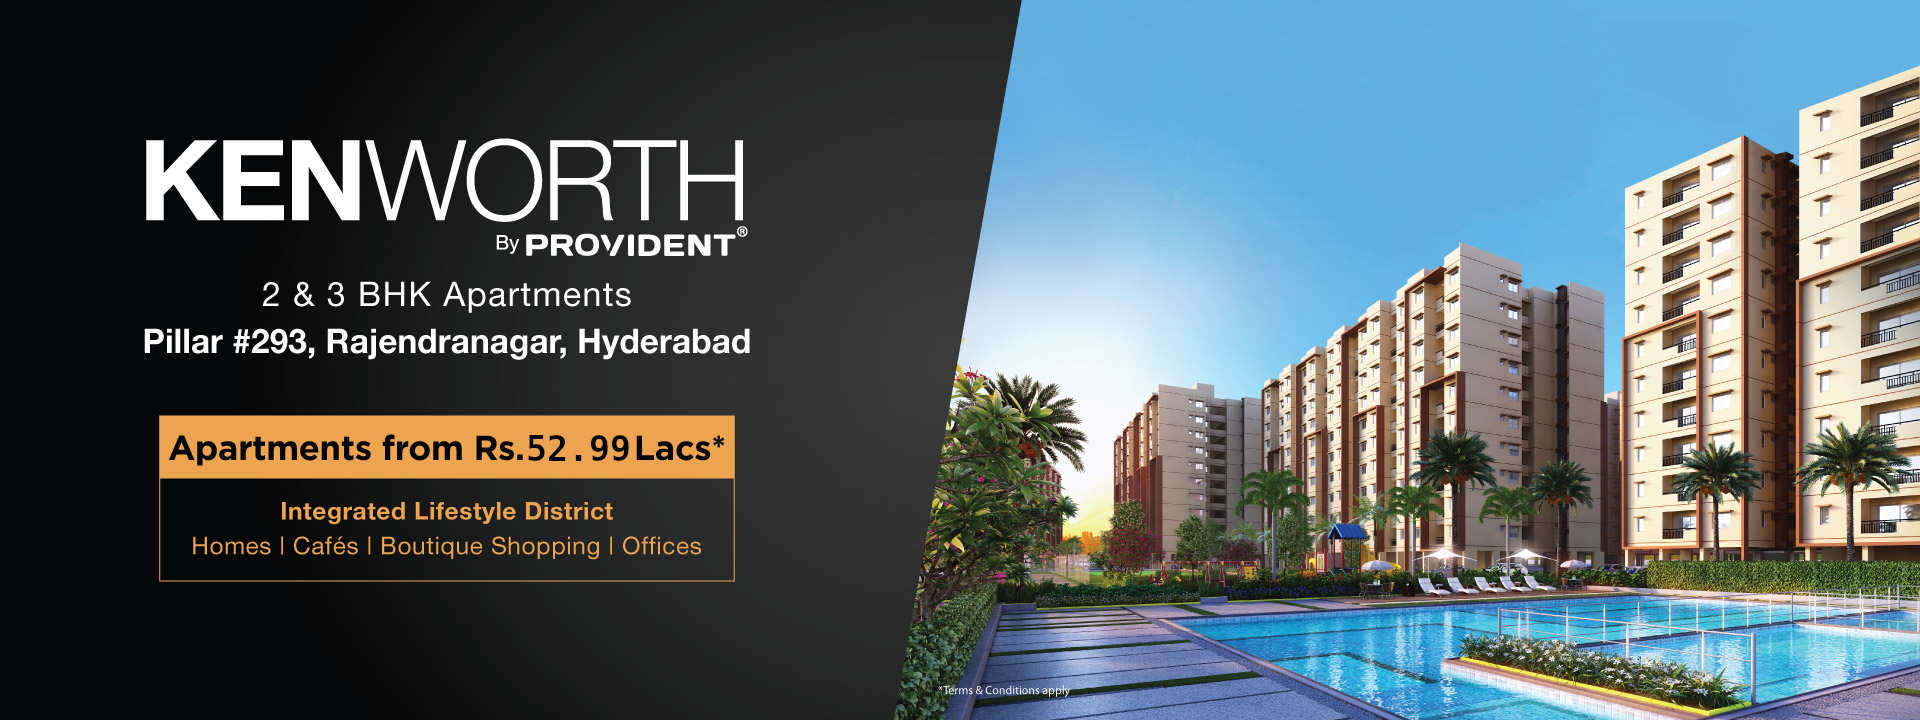 Provident Kenworth presents 2 & 3 bhk apartments at Rs. 52.99 lakhs in Hyderabad